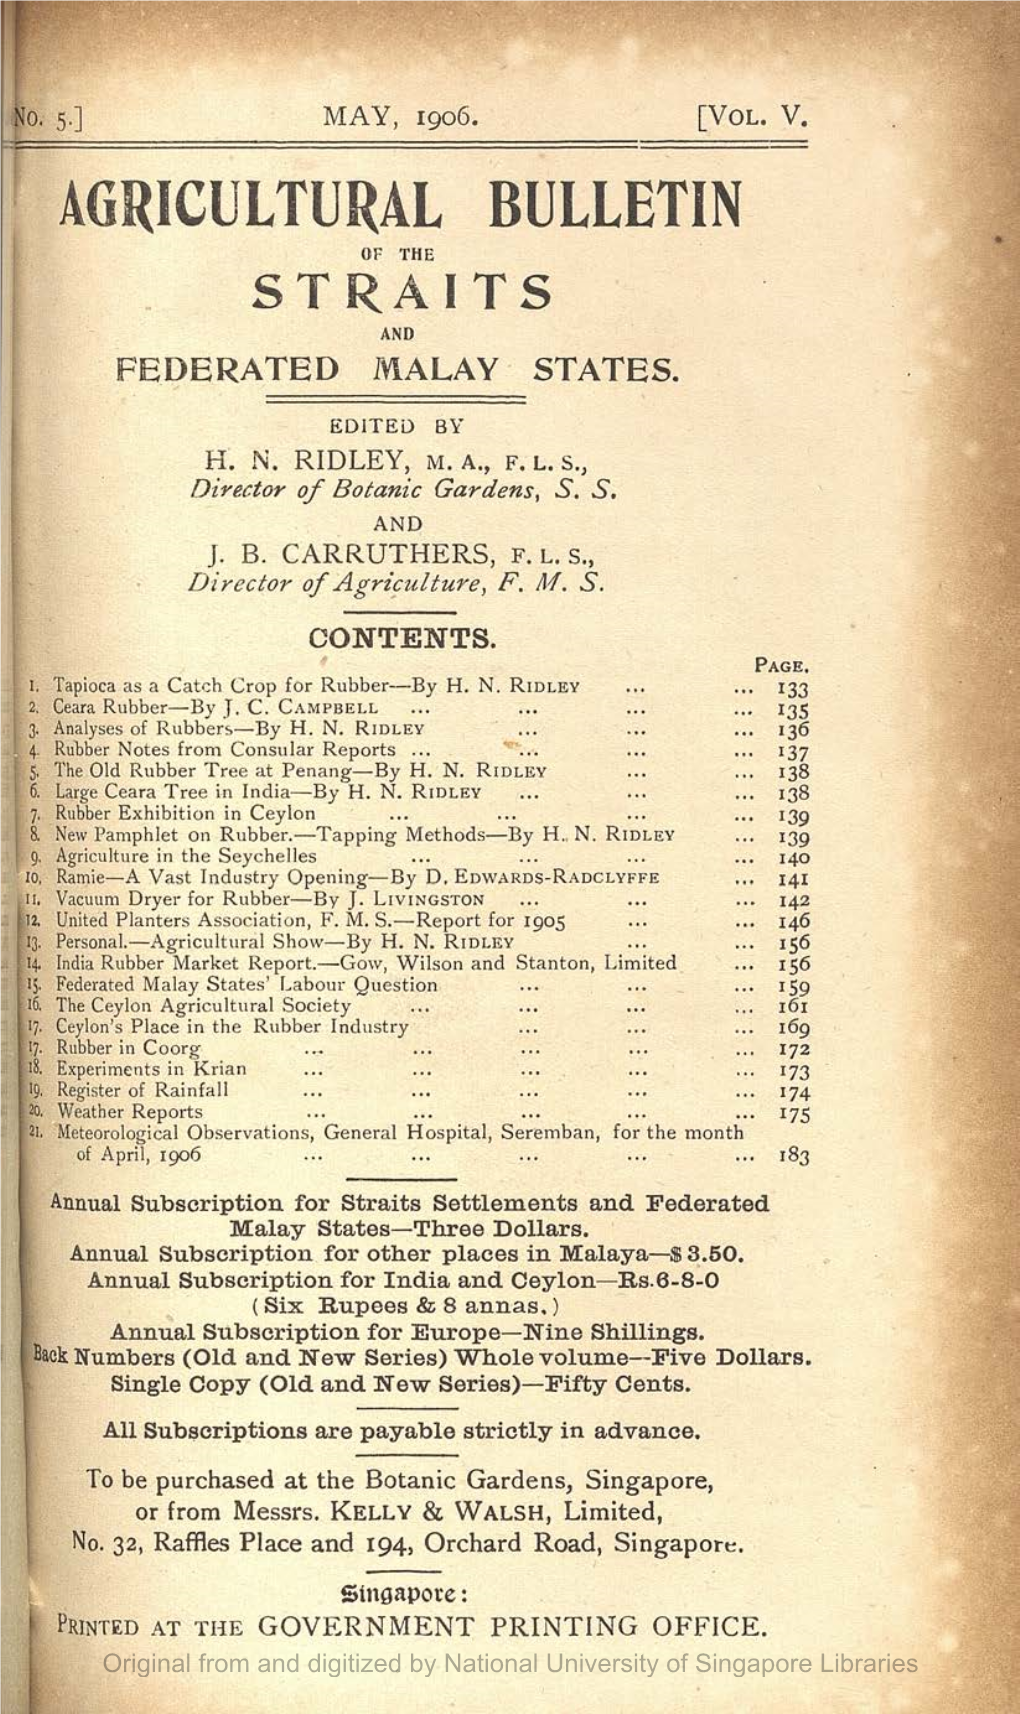 Agricultural Bulletin of the Straits and Federated Malay States